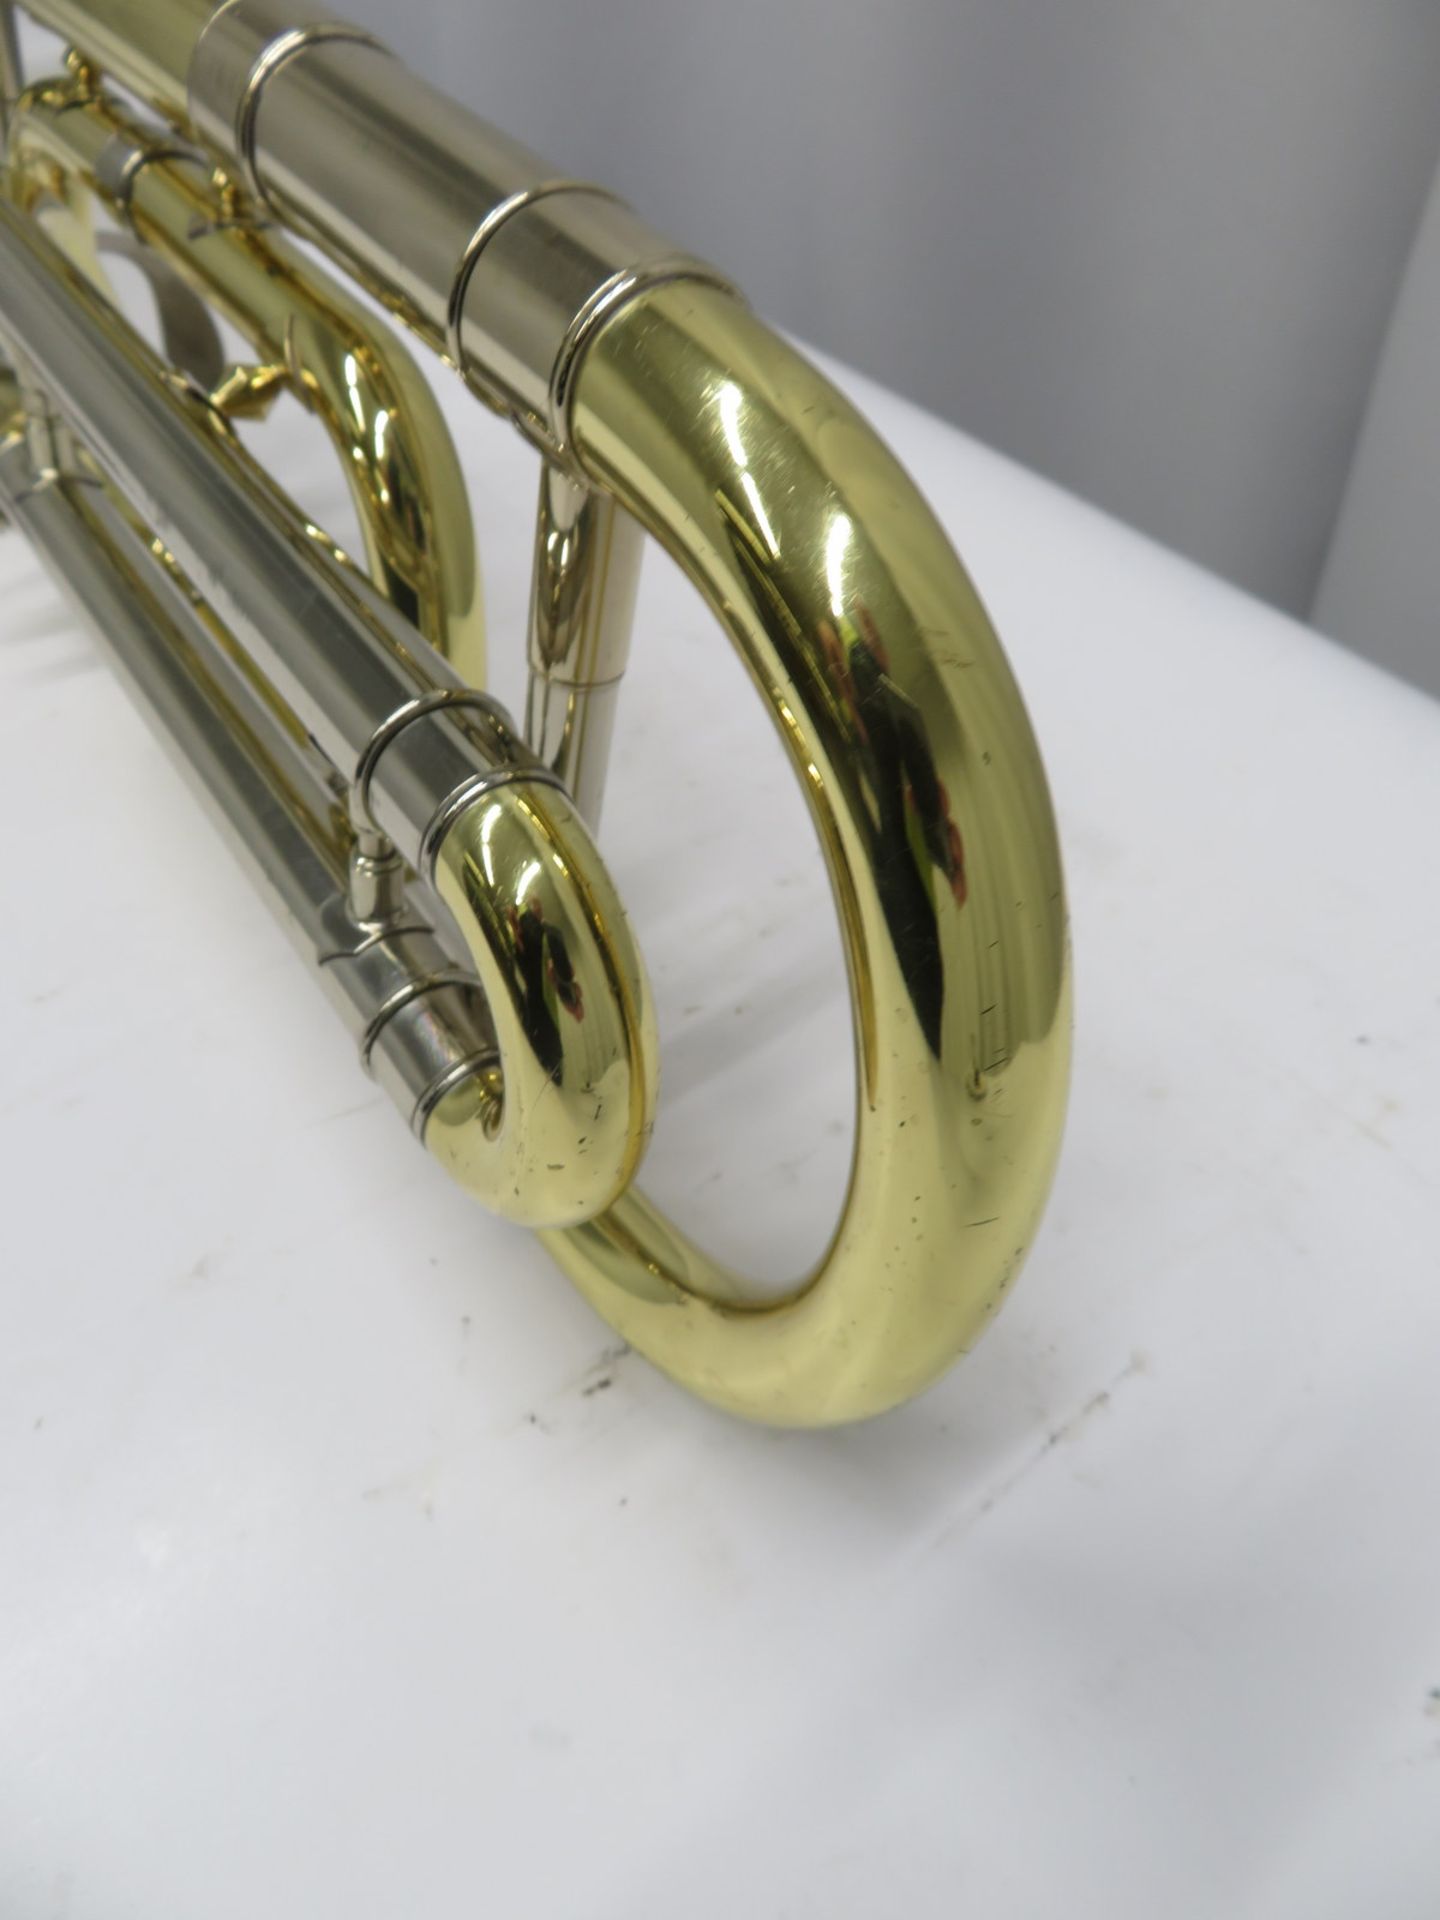 Bach Stradivarius model 42 trombone with case. Serial number: 41064. - Image 6 of 17